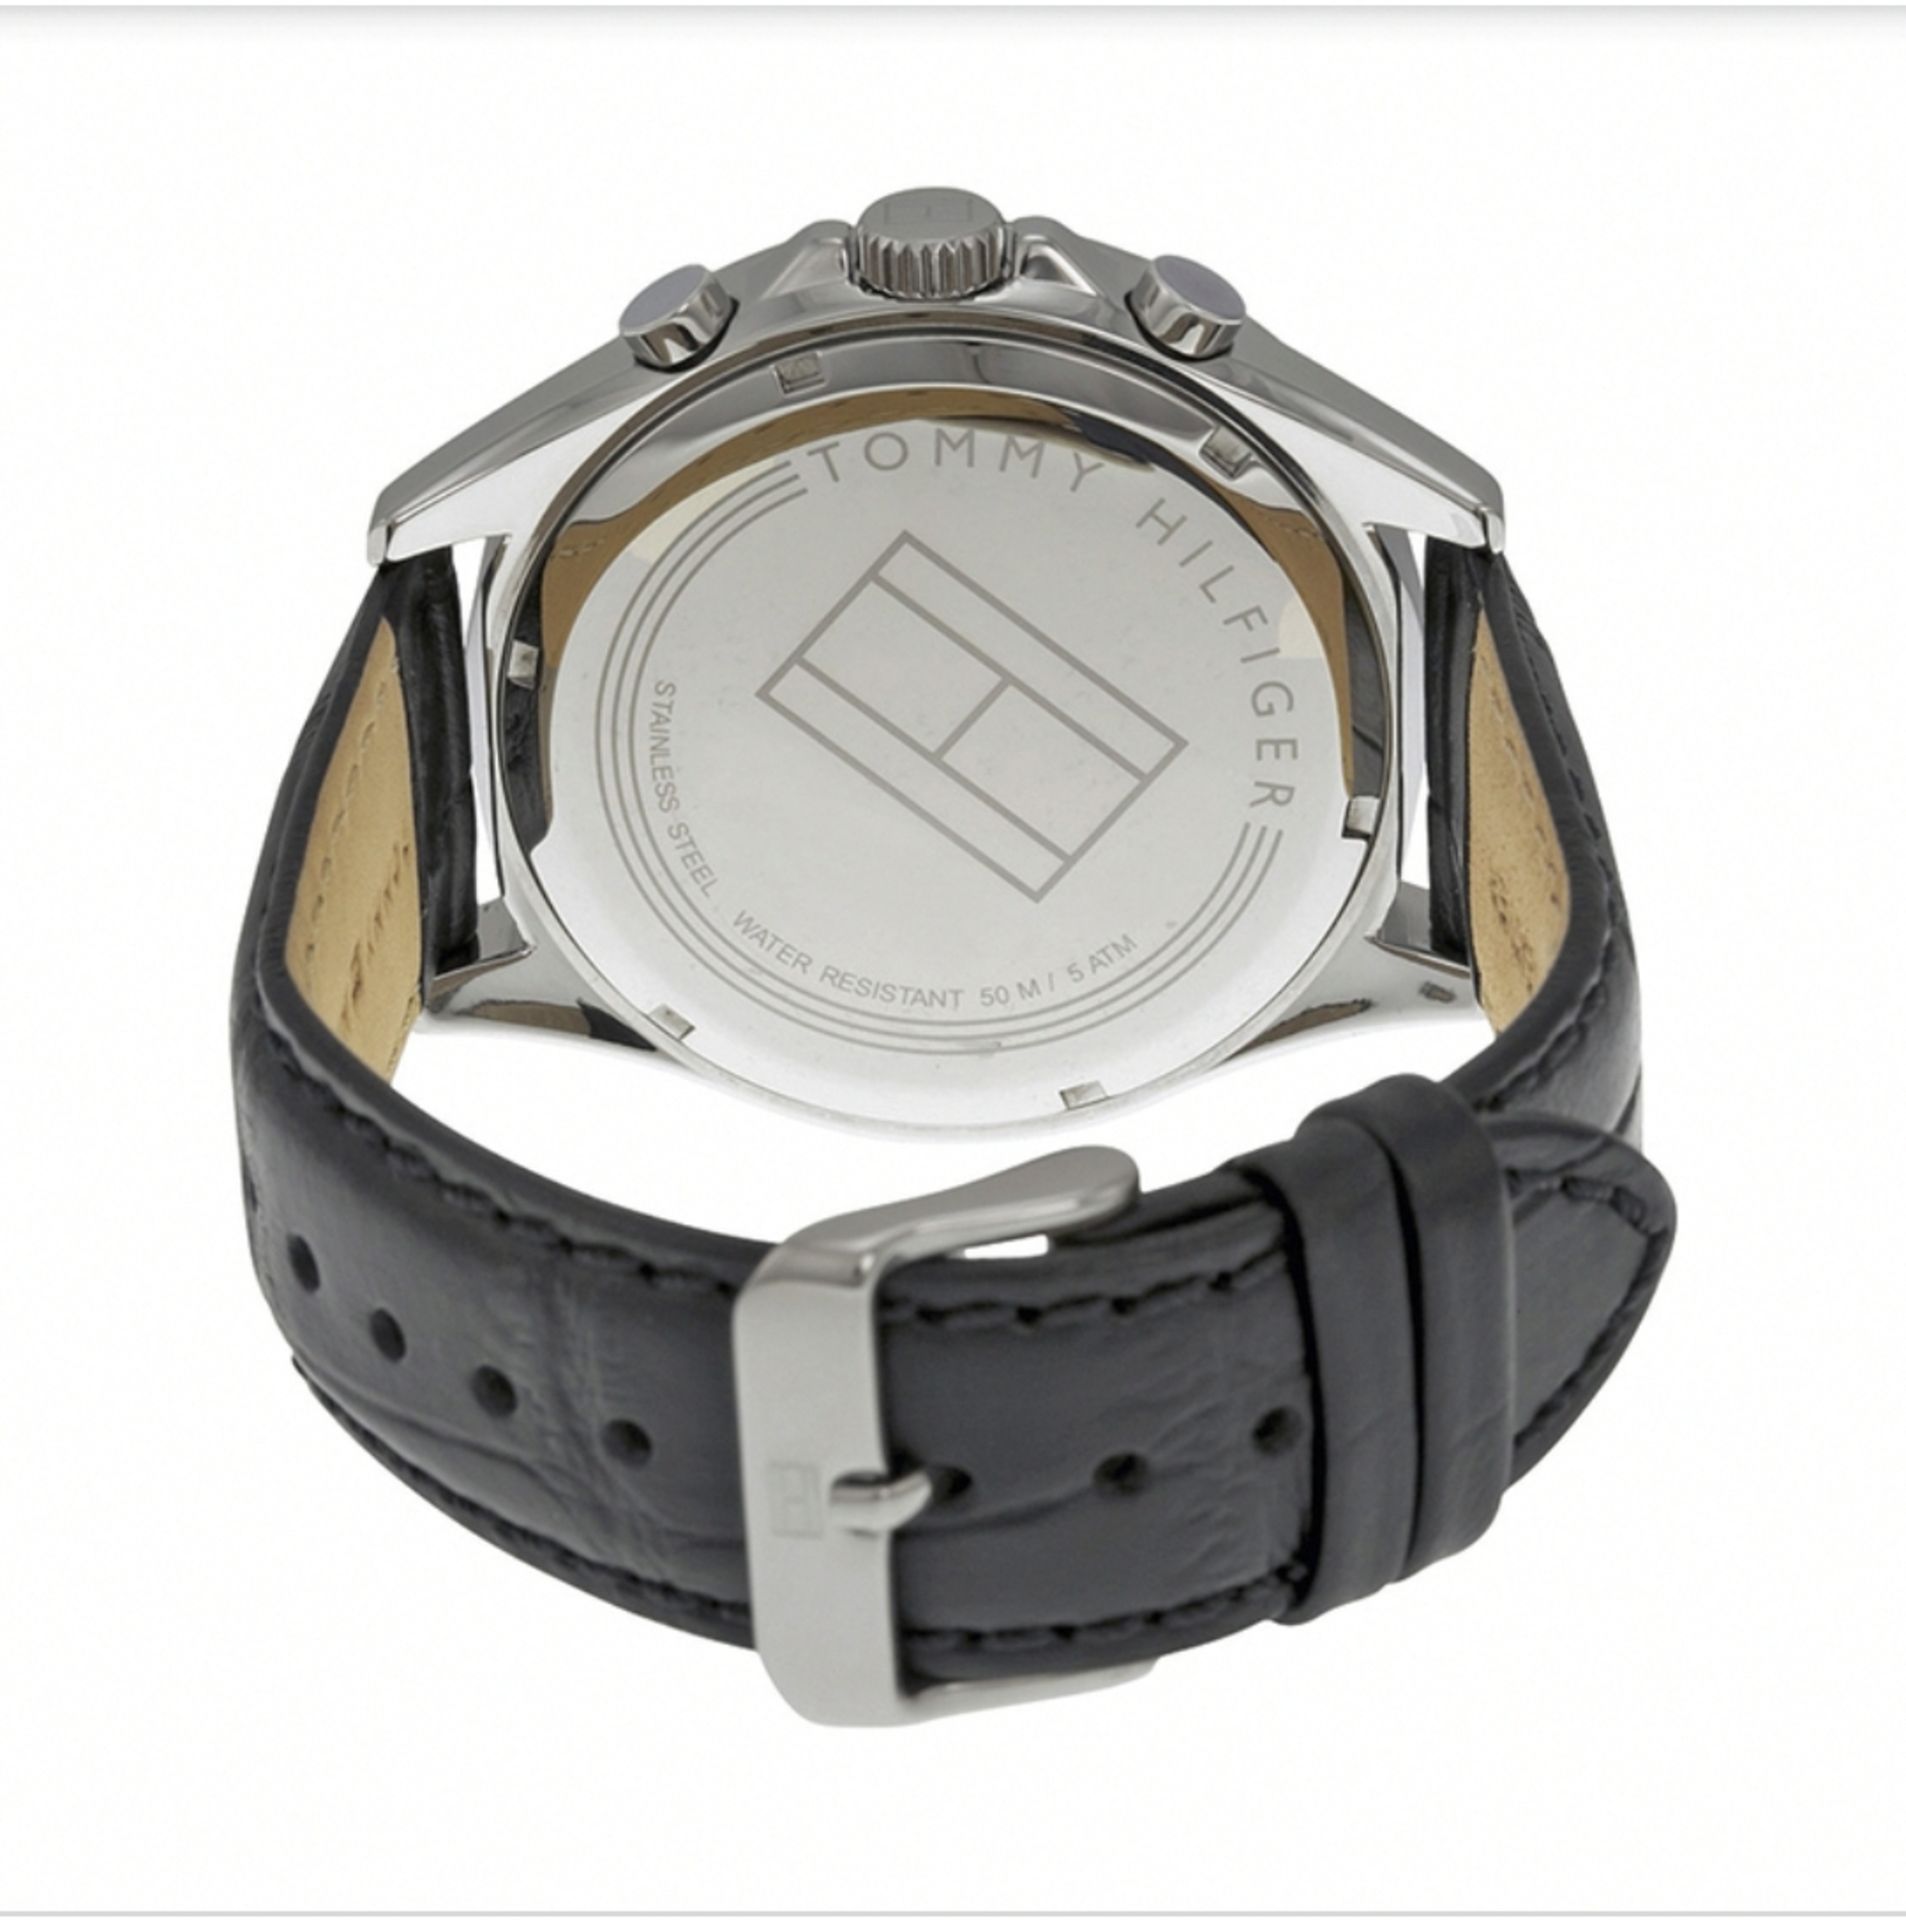 Men's Tommy Hilfiger Multi-Function Leather Strap Watch 1791117 - Image 4 of 5